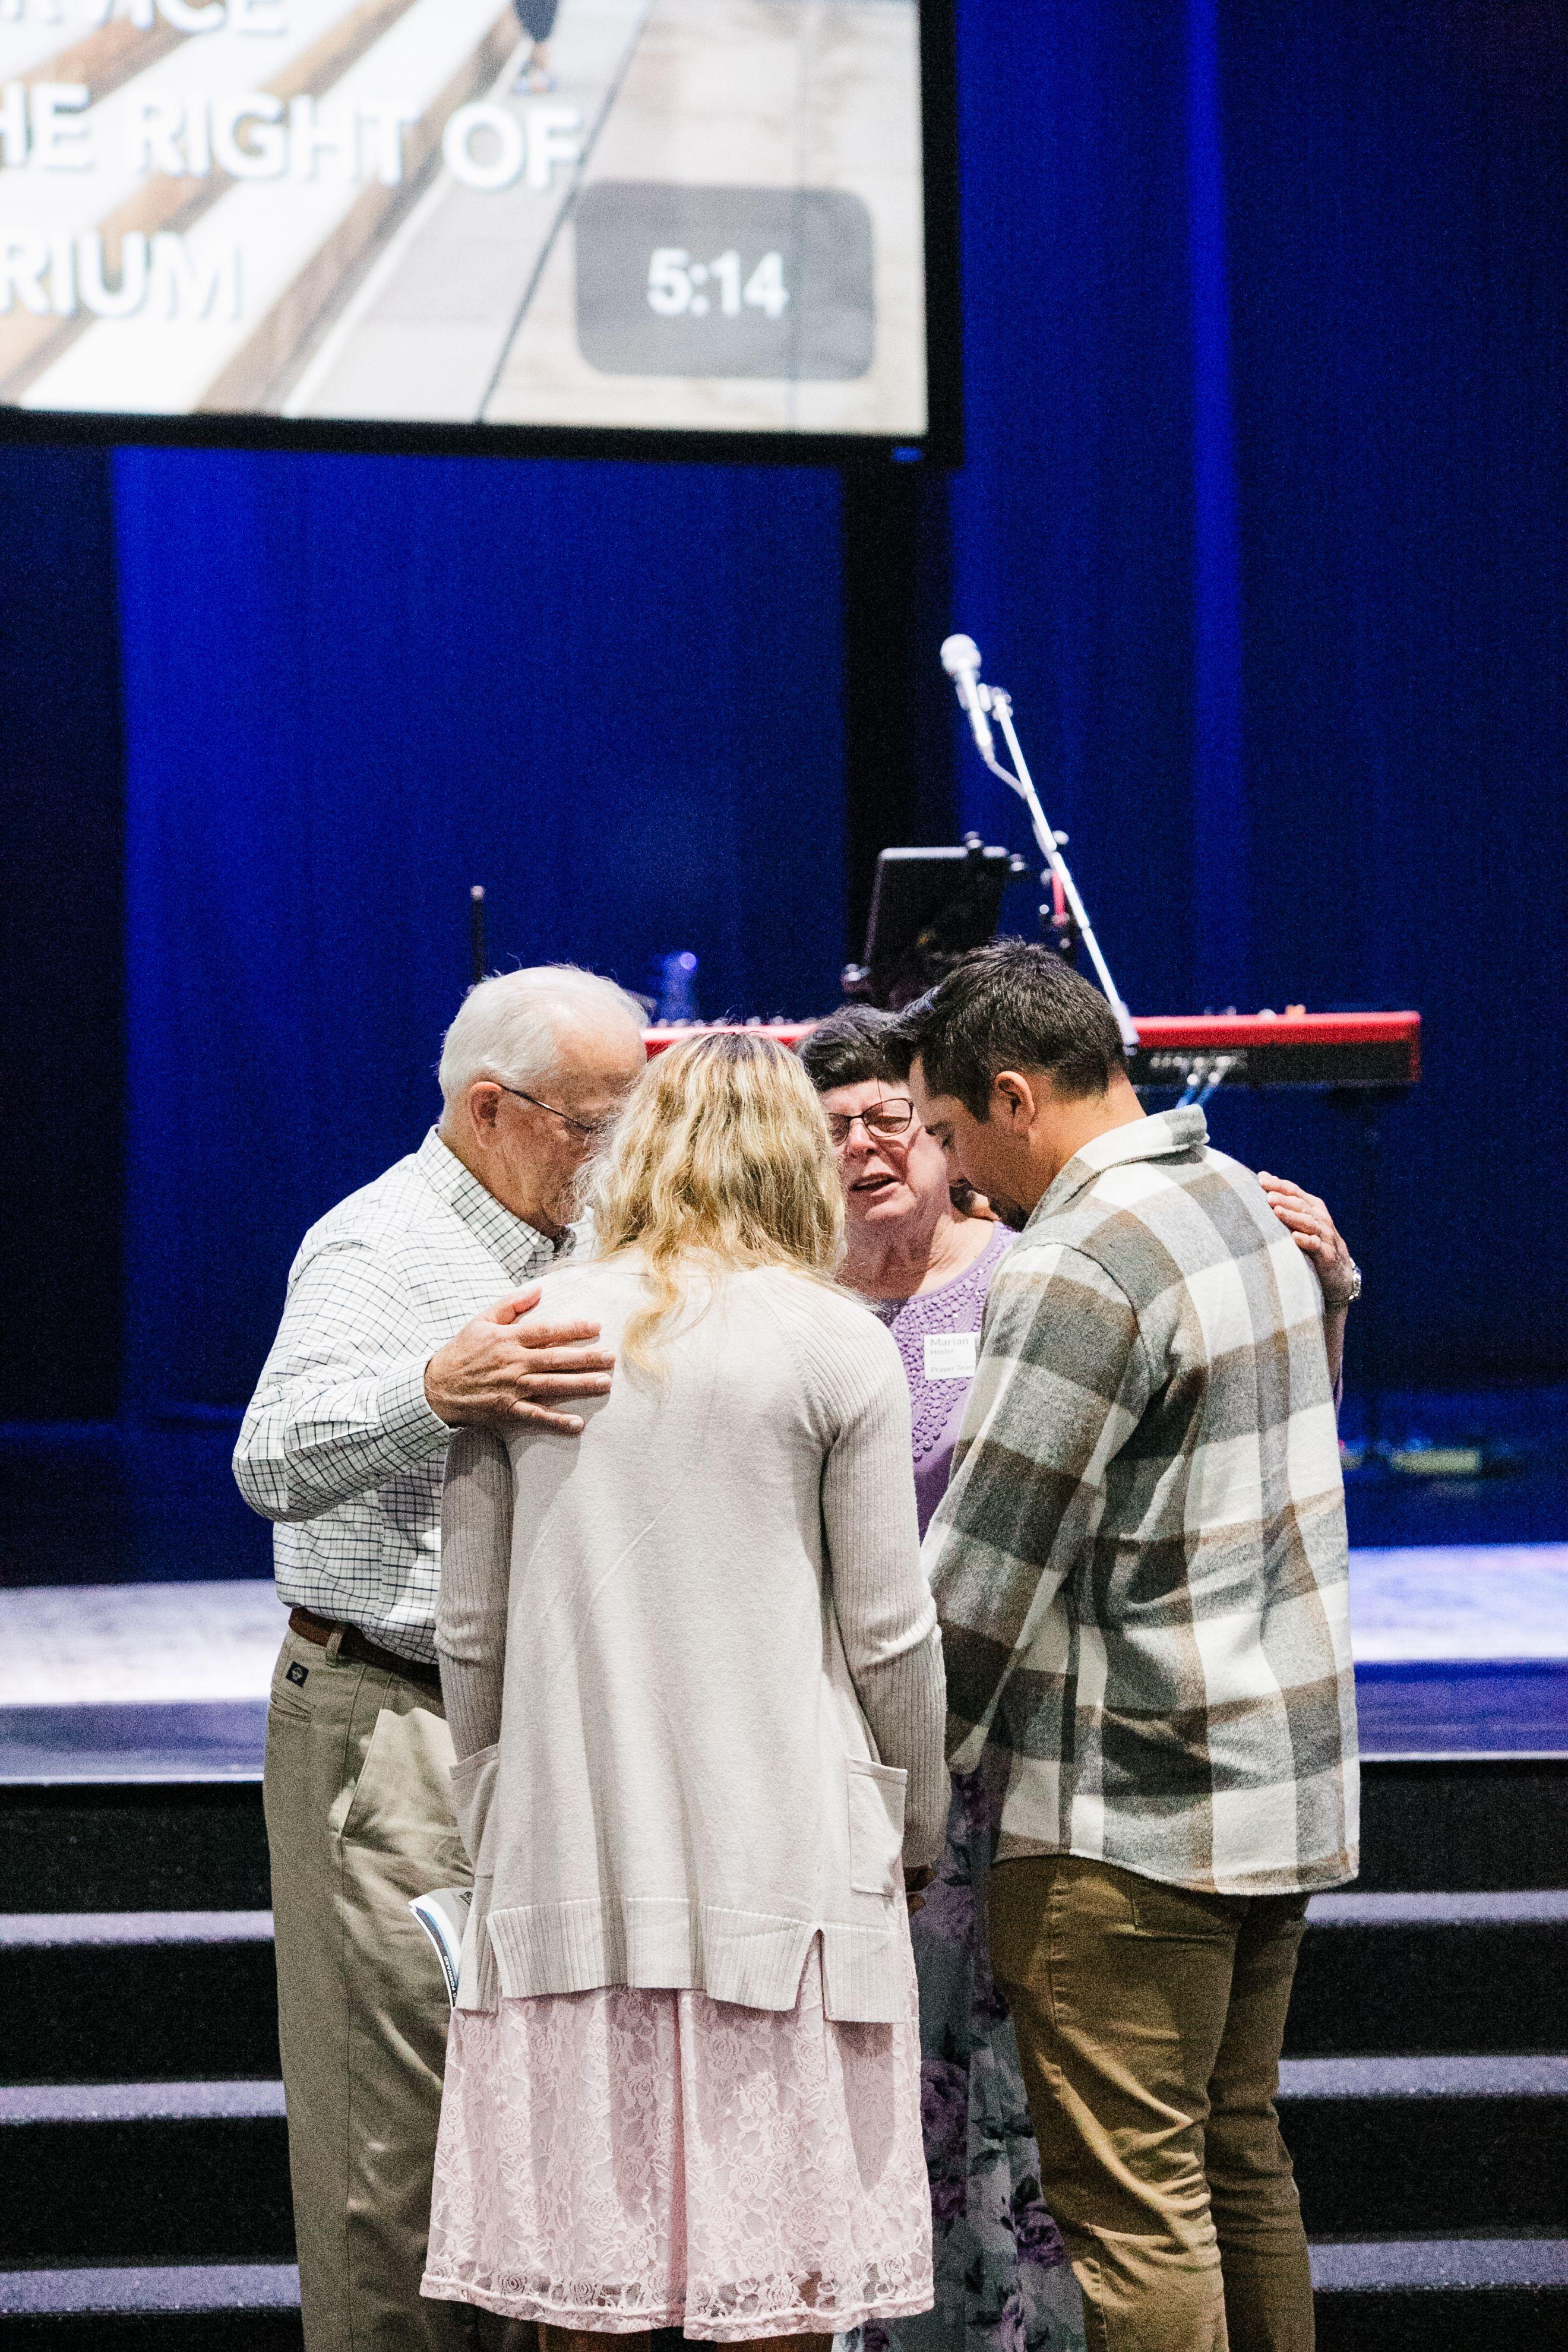 adults praying together at church.